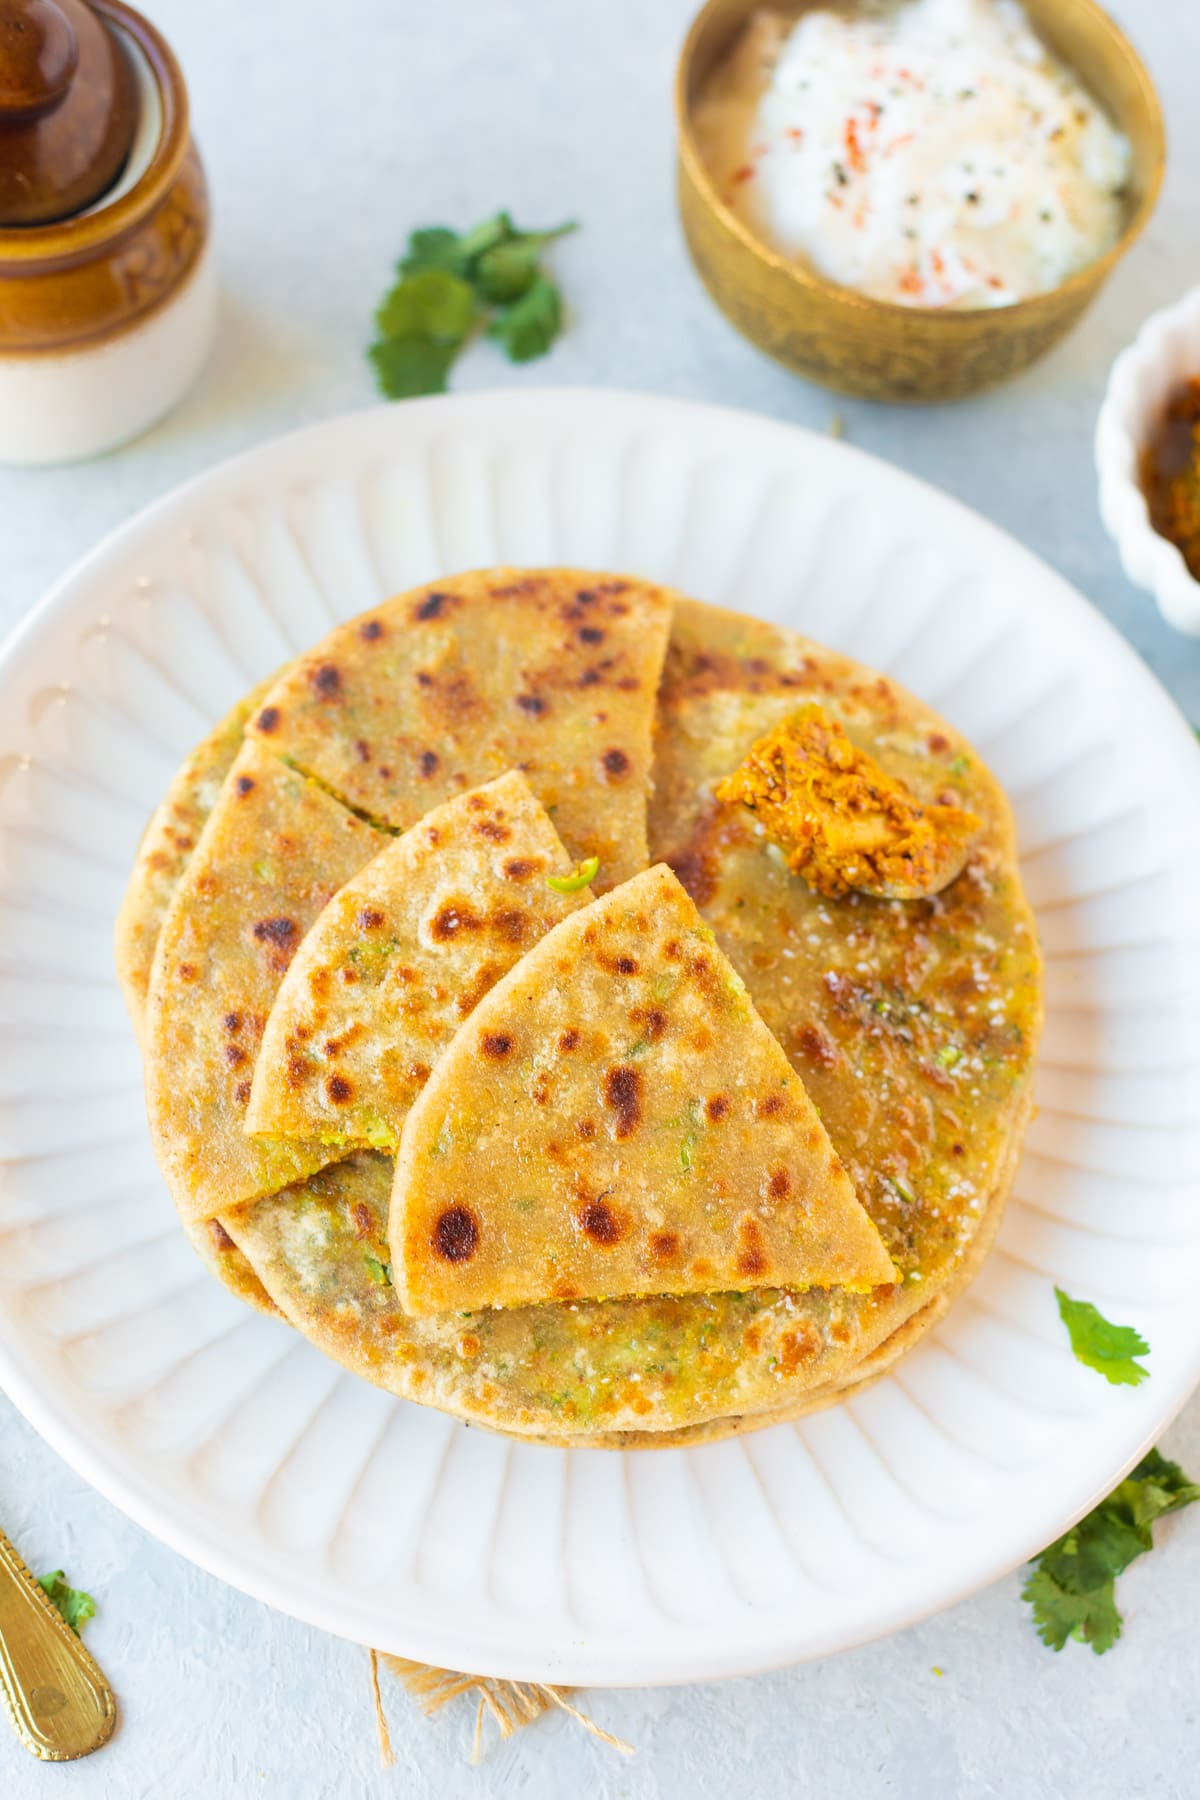 Broccoli paratha into four pieces in a plate